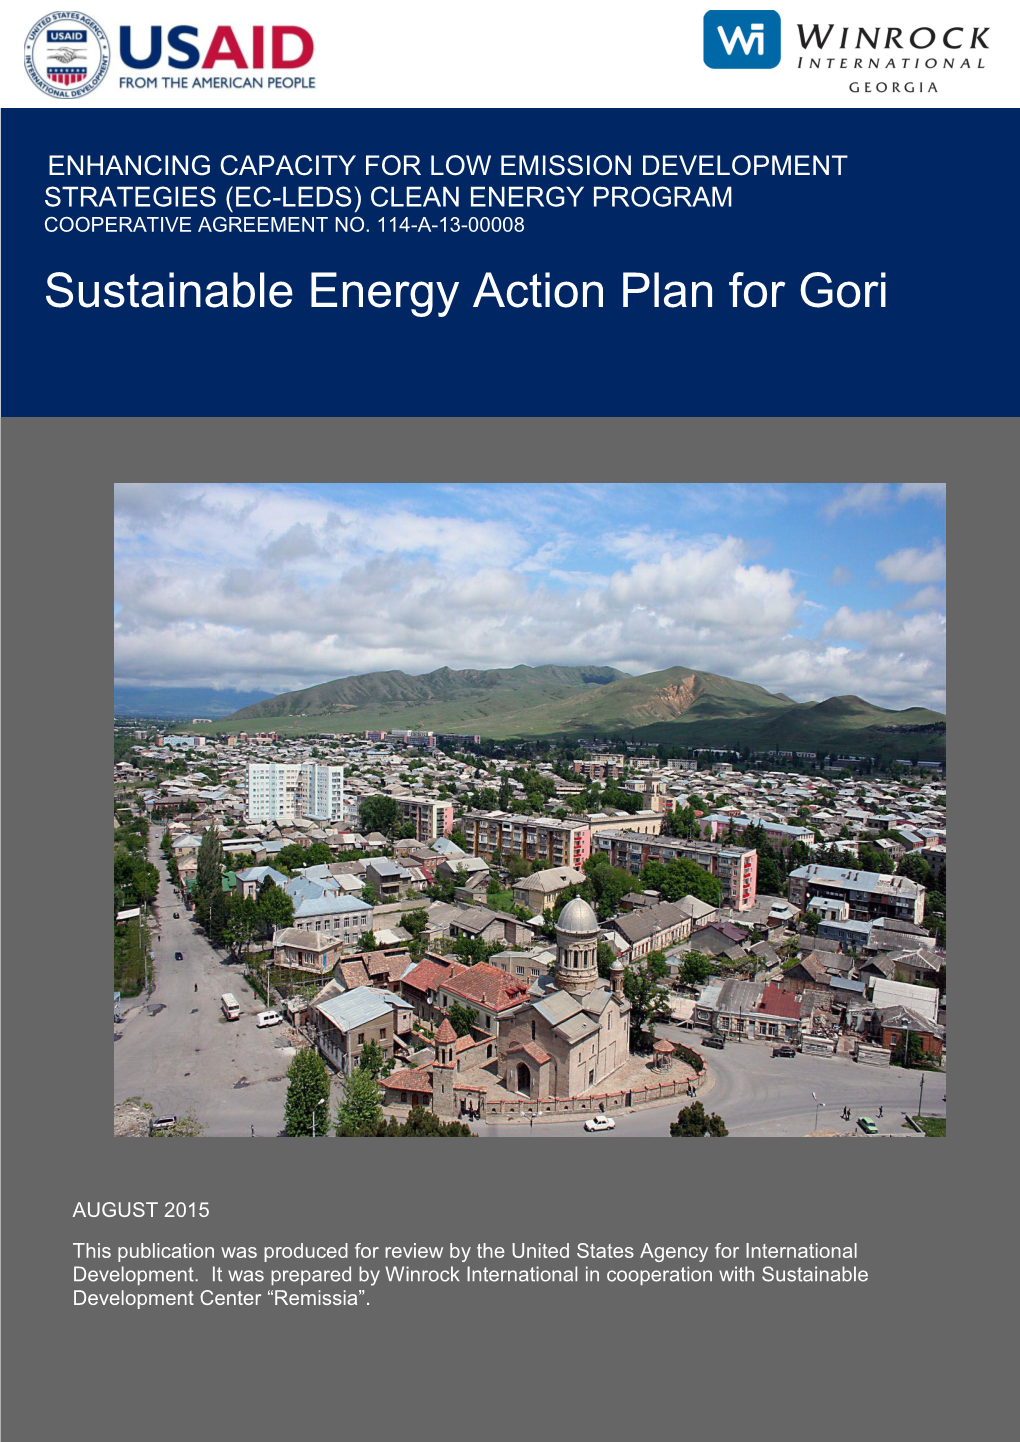 Sustainable Energy Action Plan for Gori